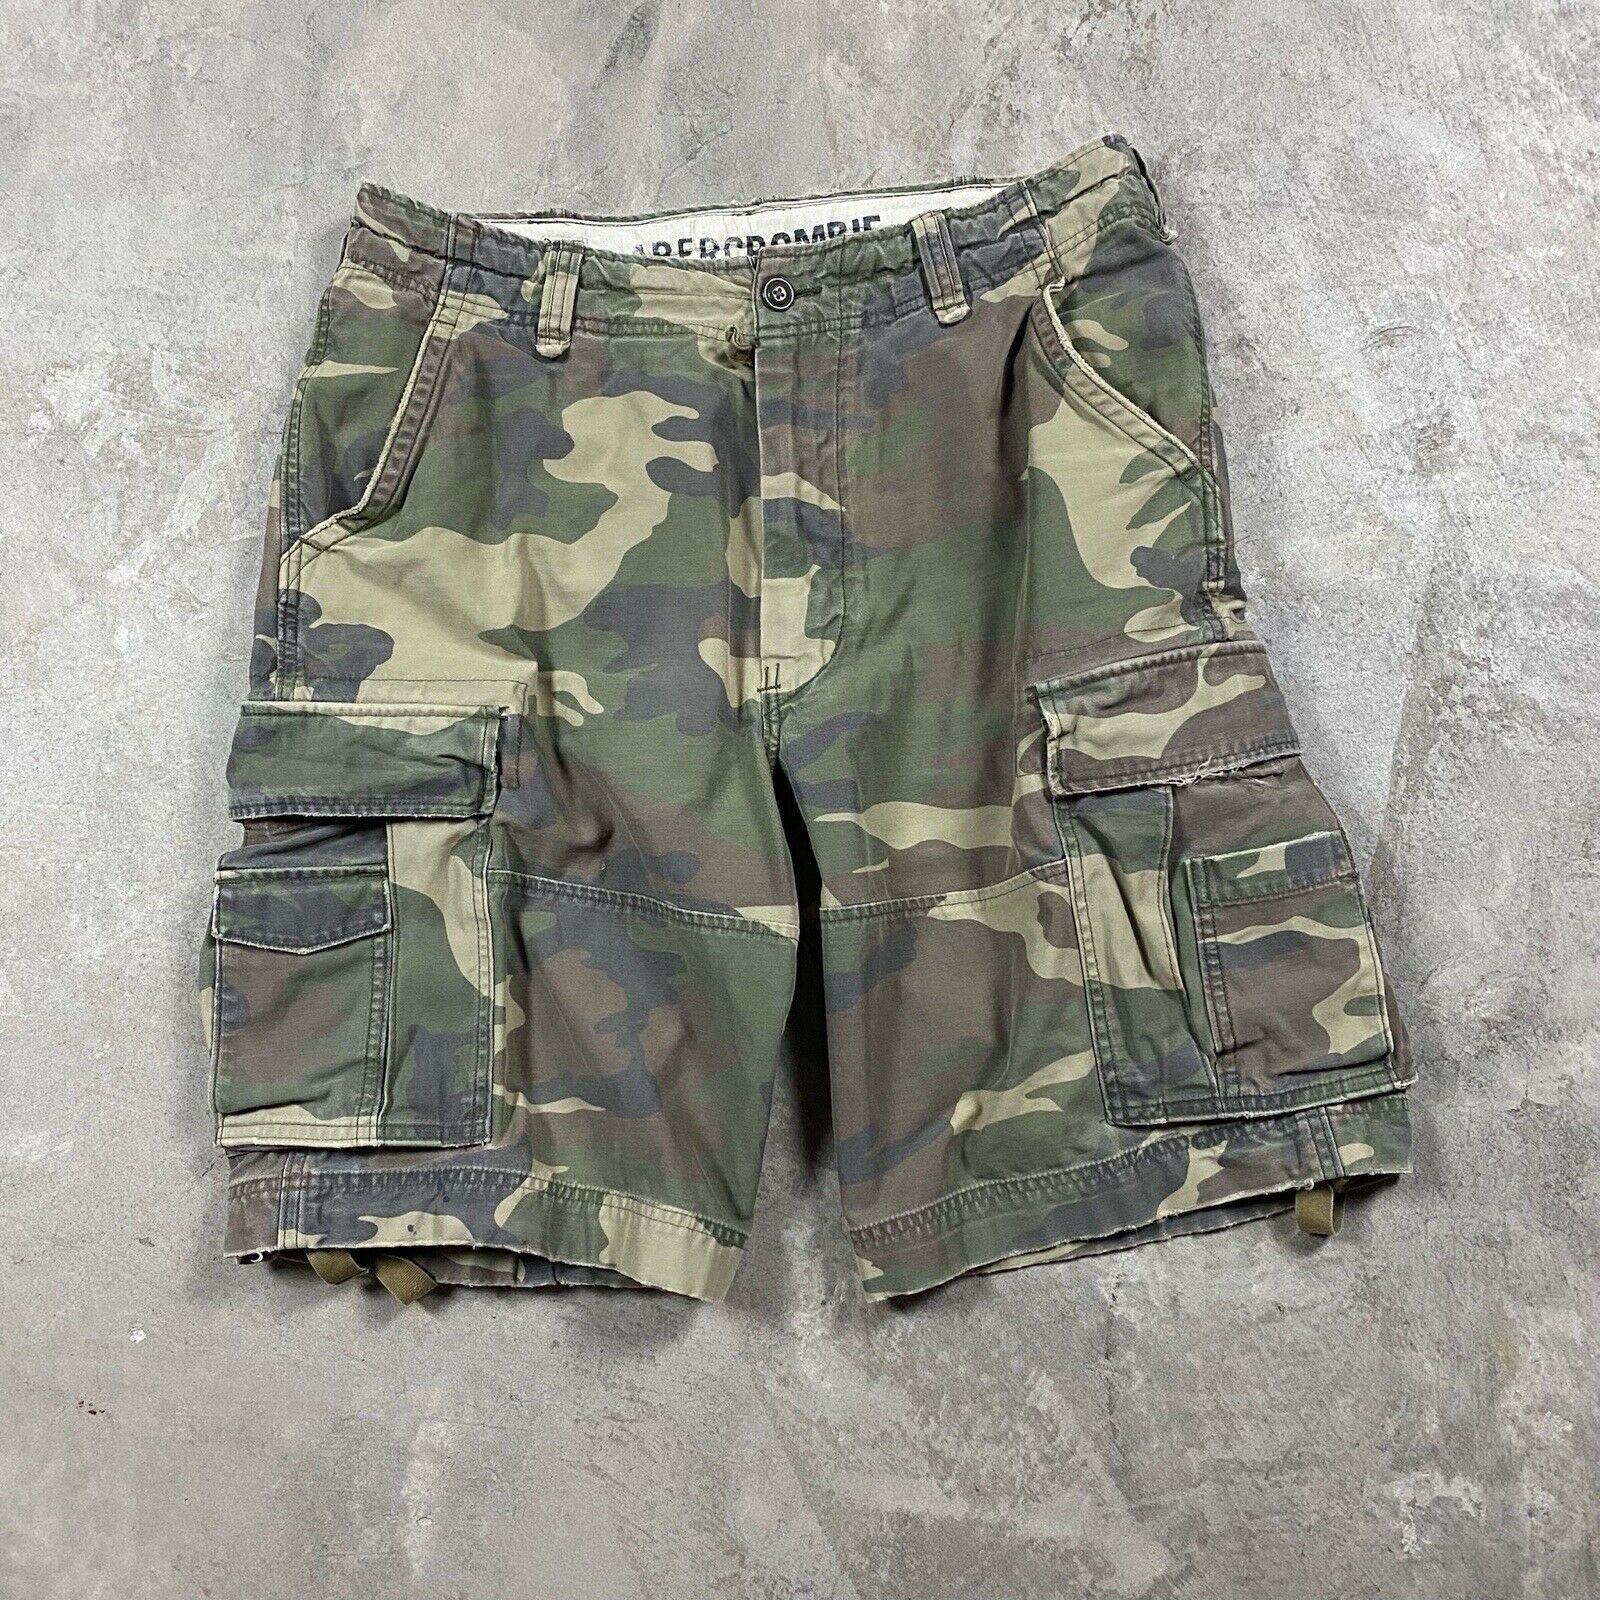 Abercrombie & Fitch 90s VTG ABERCROMBIE & FITCH Camouflage Cargo Shorts ...